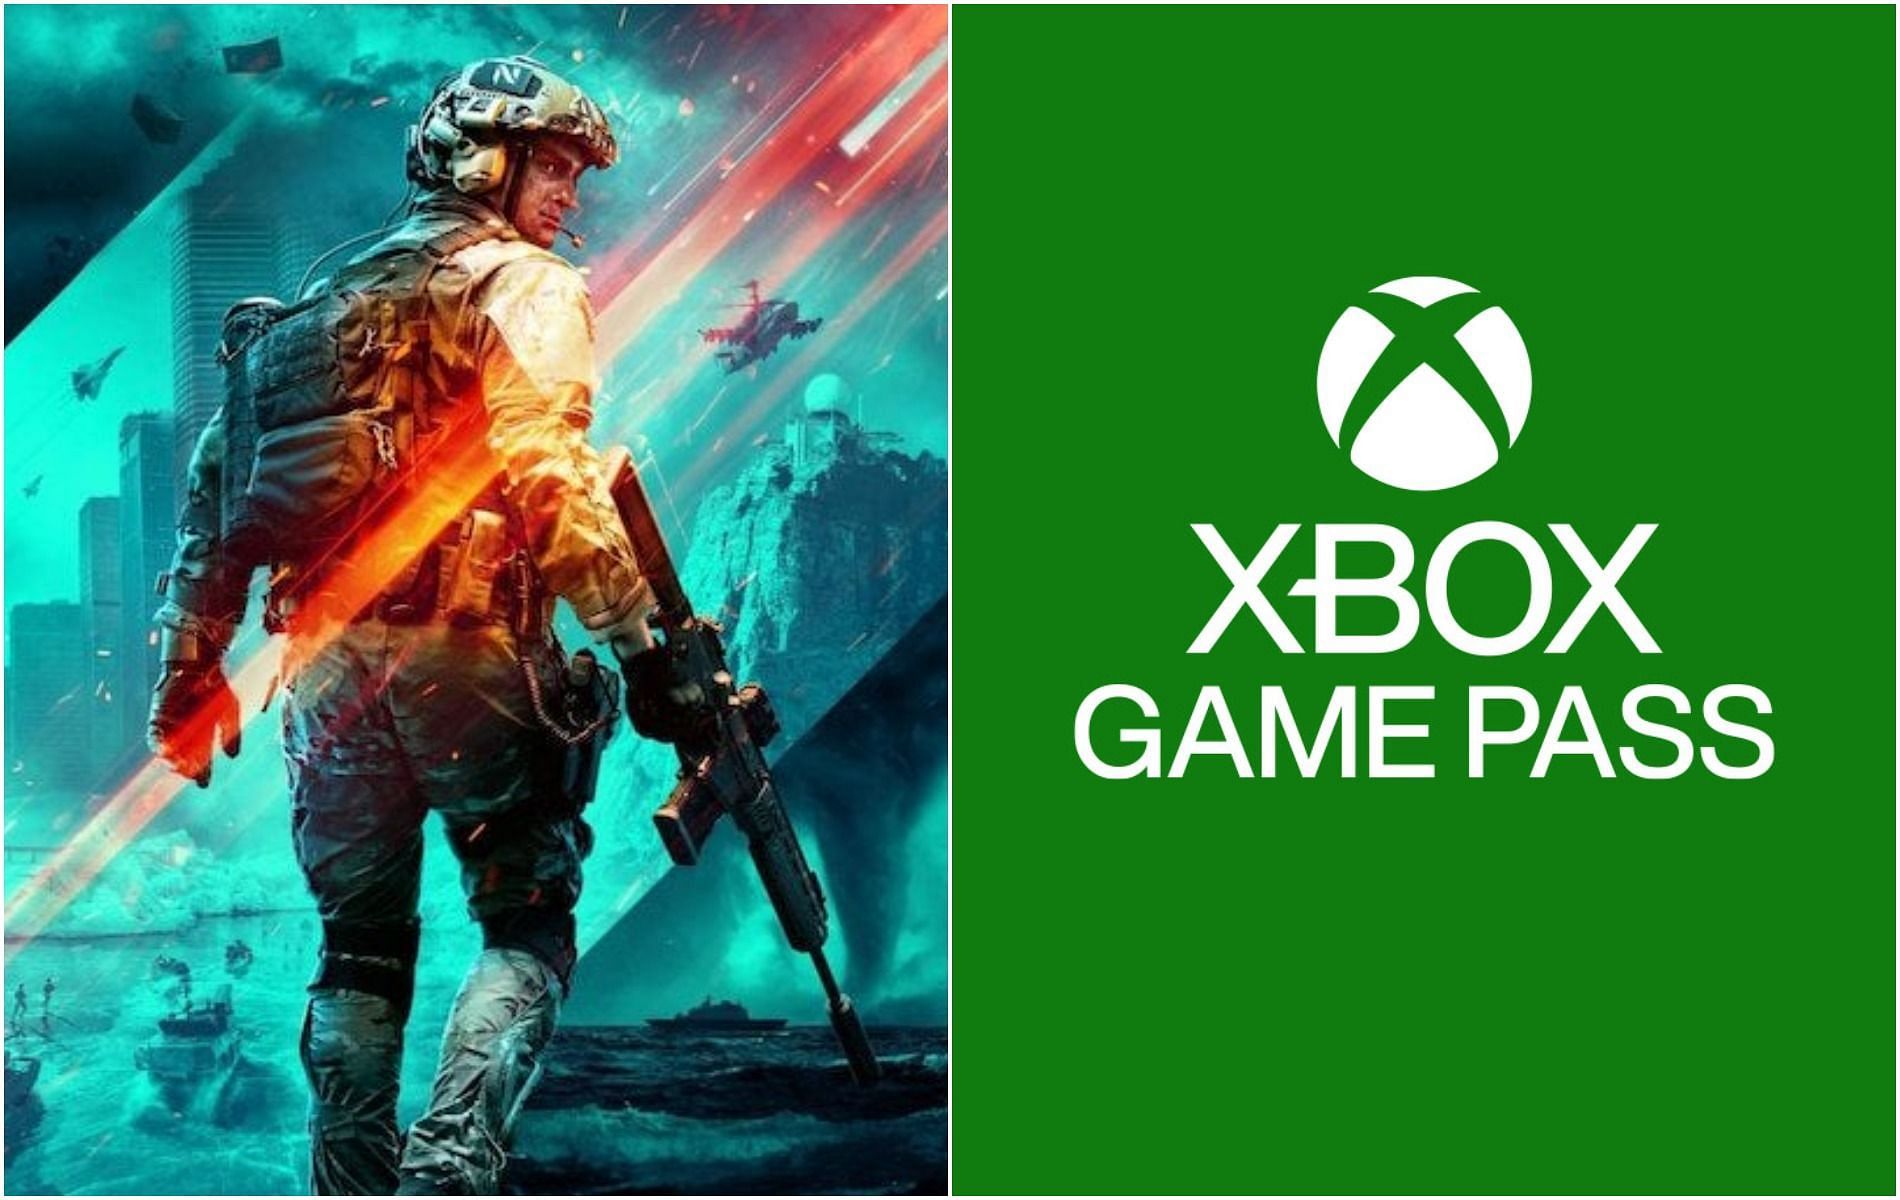 Battlefield 2042 can possibly appear on Xbox Game Pass (Image via Sportskeeda)